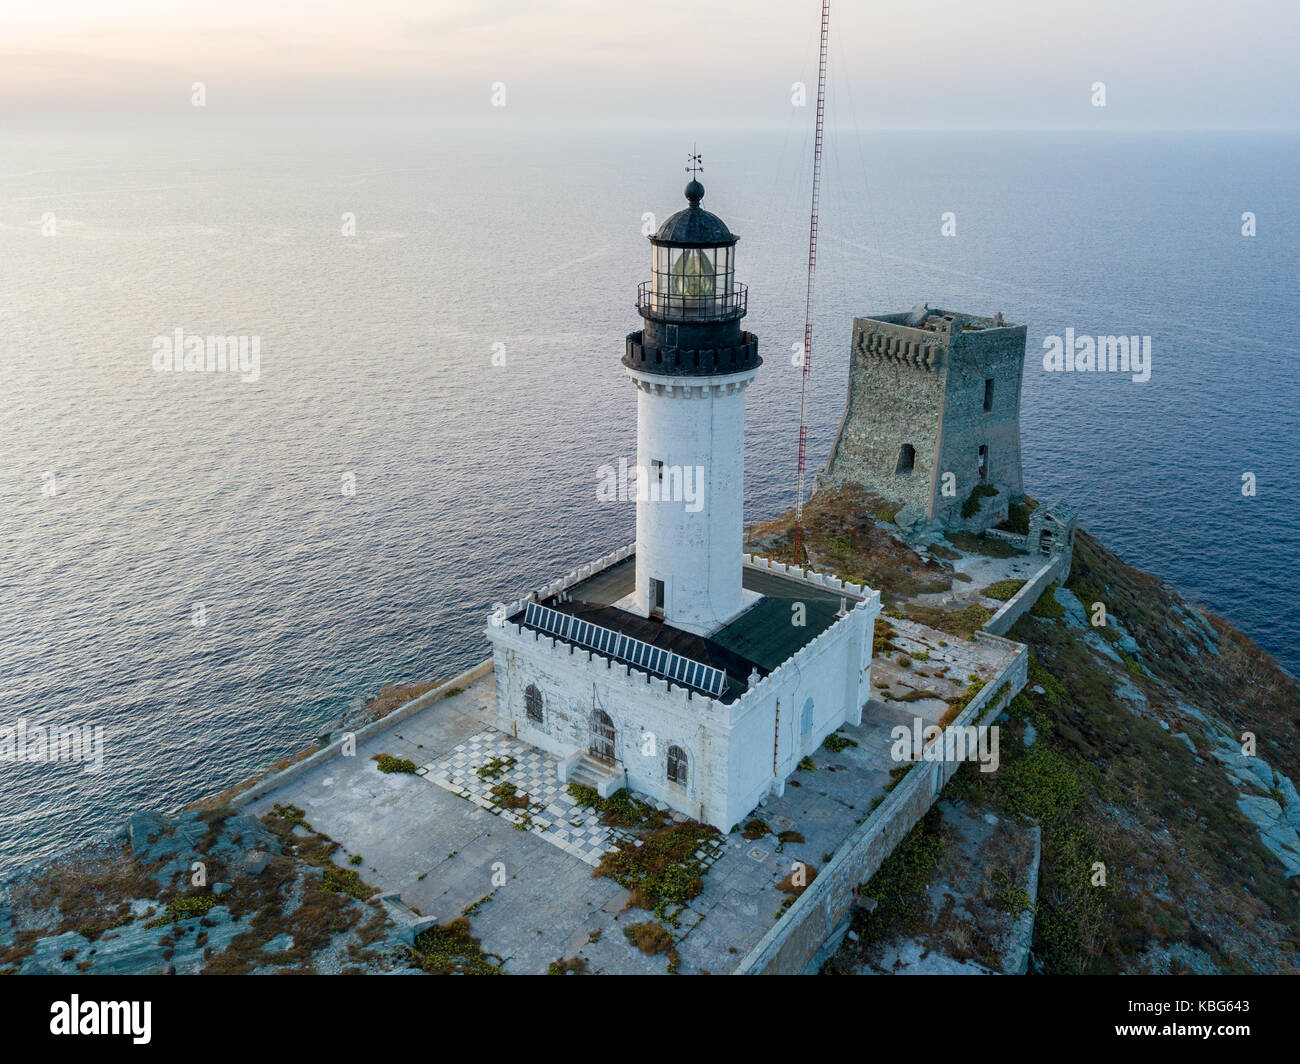 Aerial view of the Lighthouse and Tower on the island of Giraglia, the northernmost point of the Cap Corse peninsula. Corsica France Stock Photo